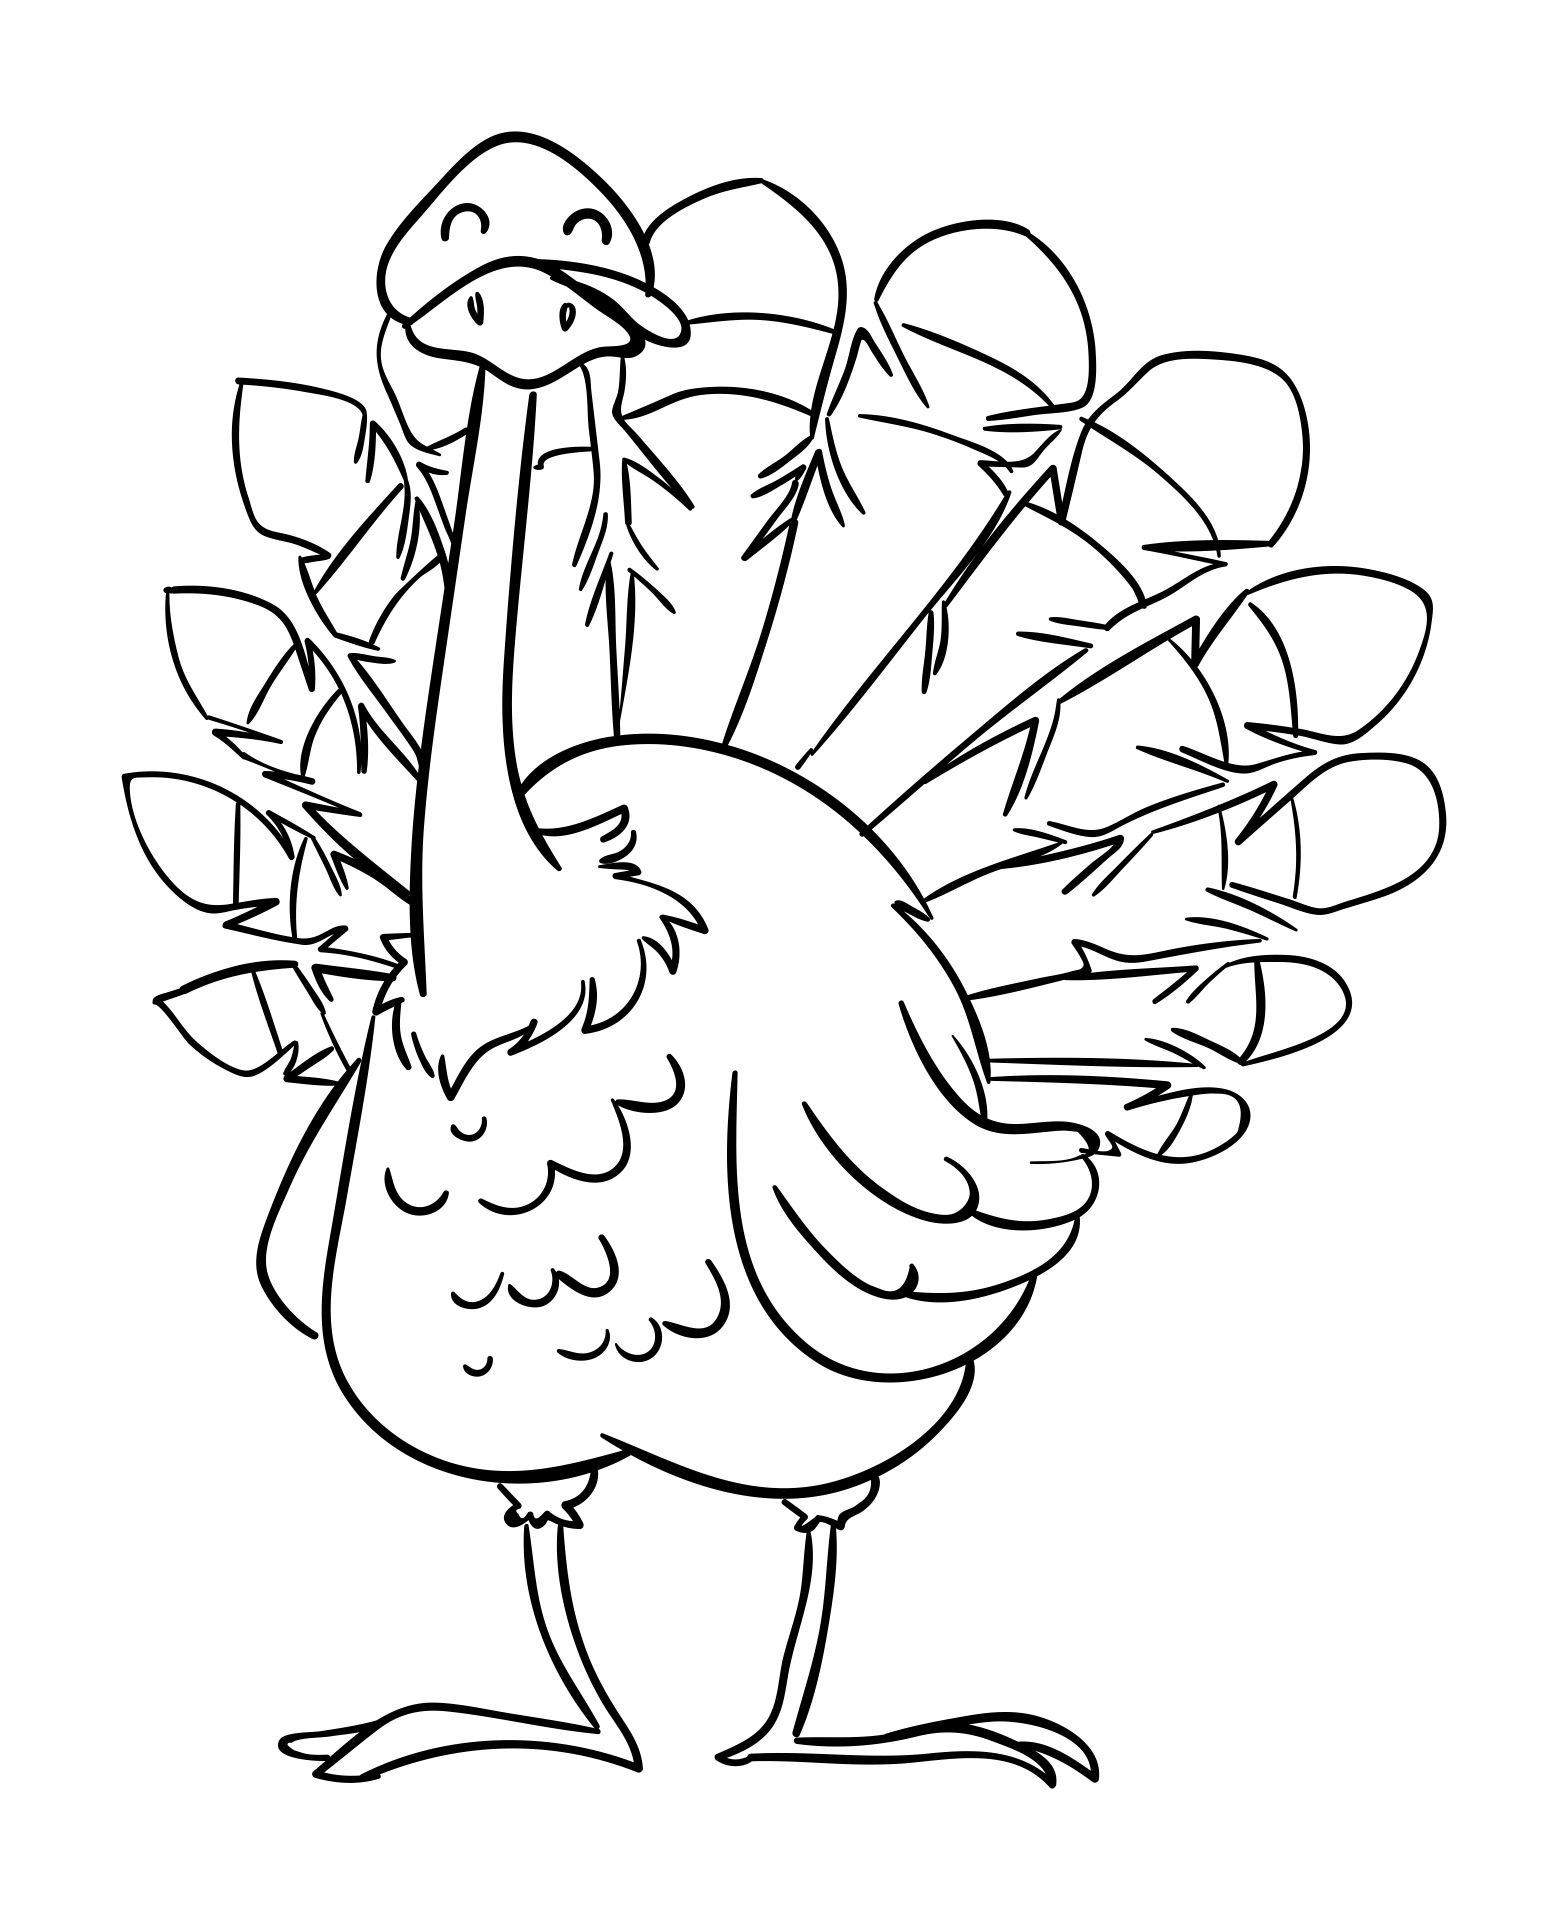 Thanksgiving Coloring Pages For Preschool